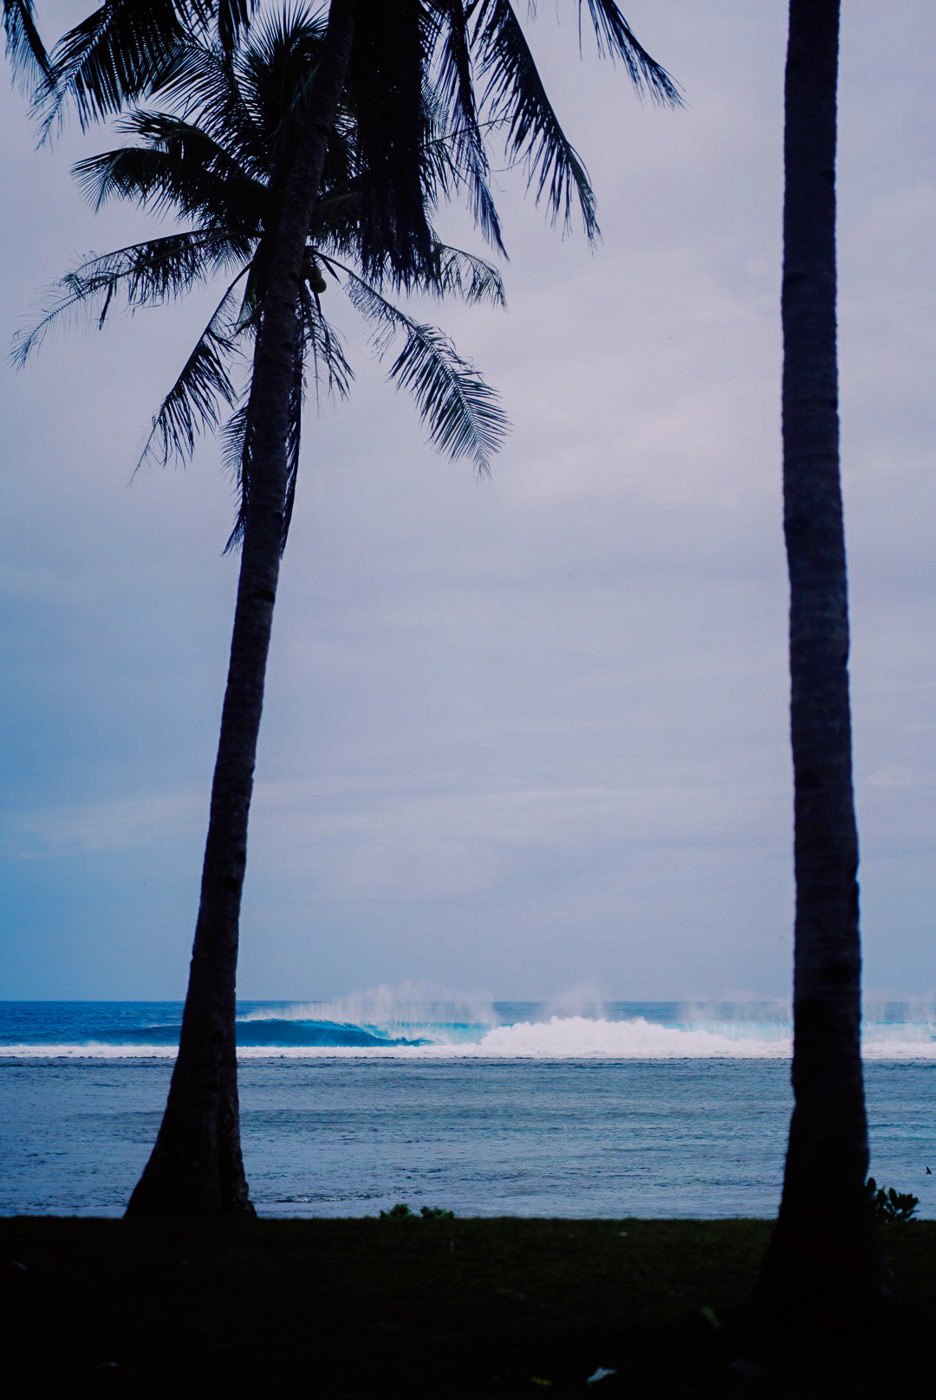 a couple of palm trees sitting next to a body of water.